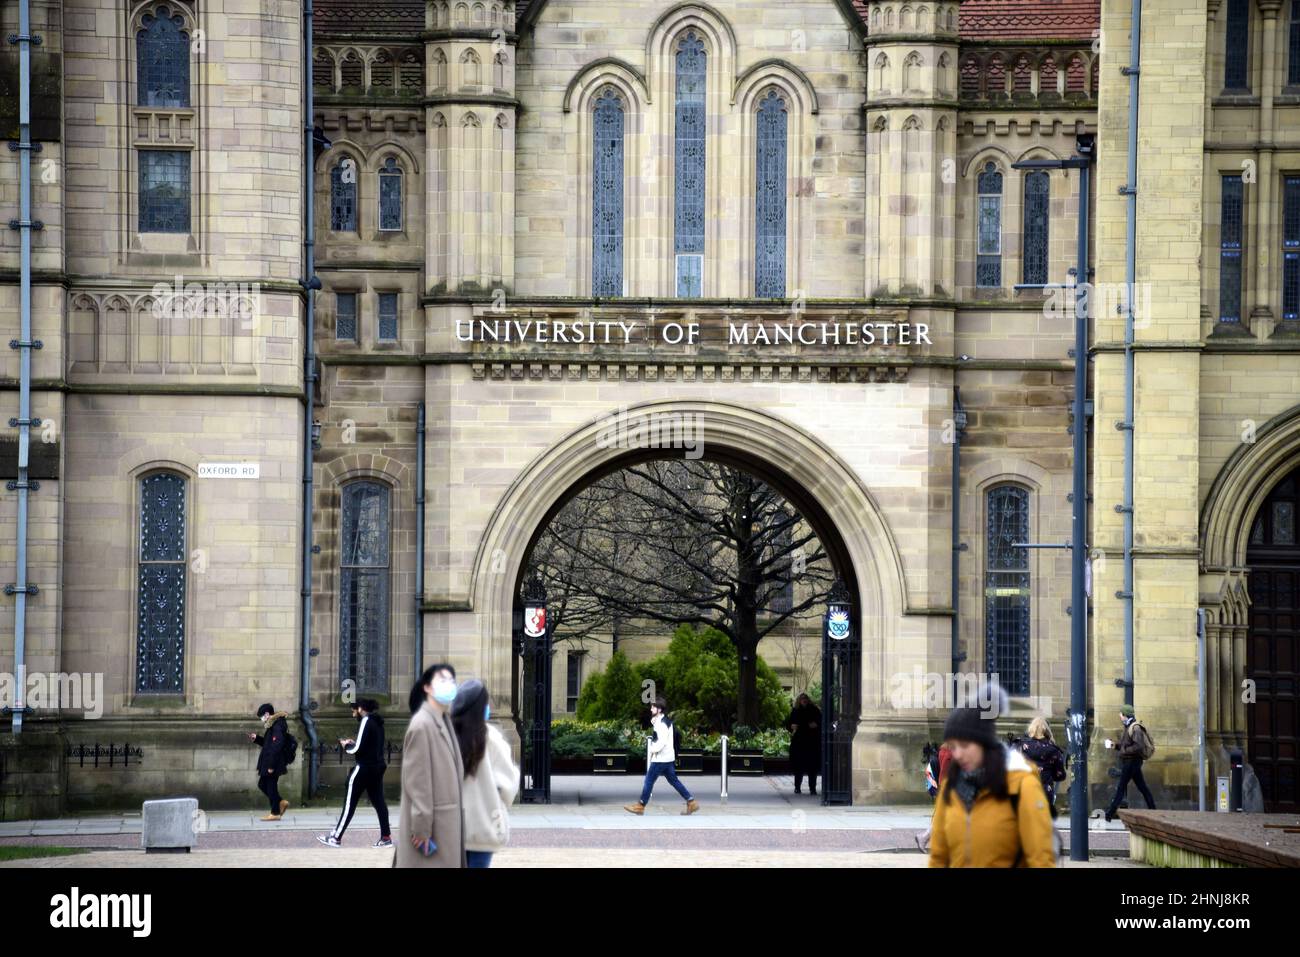 Manchester, UK, 17th February, 2022. People walk in front of Whitworth Hall, University of Manchester, Oxford Road, Manchester, England, United Kingdom.  The University of Manchester has been named the most targeted university by the UK’s top 100 graduate employers, according to The Graduate Market in 2022. The Graduate Market is an independent annual review of graduate vacancies and starting salaries at the UK’s leading employers. It is carried out by High Flyers Research. Credit: Terry Waller/Alamy Live News Stock Photo